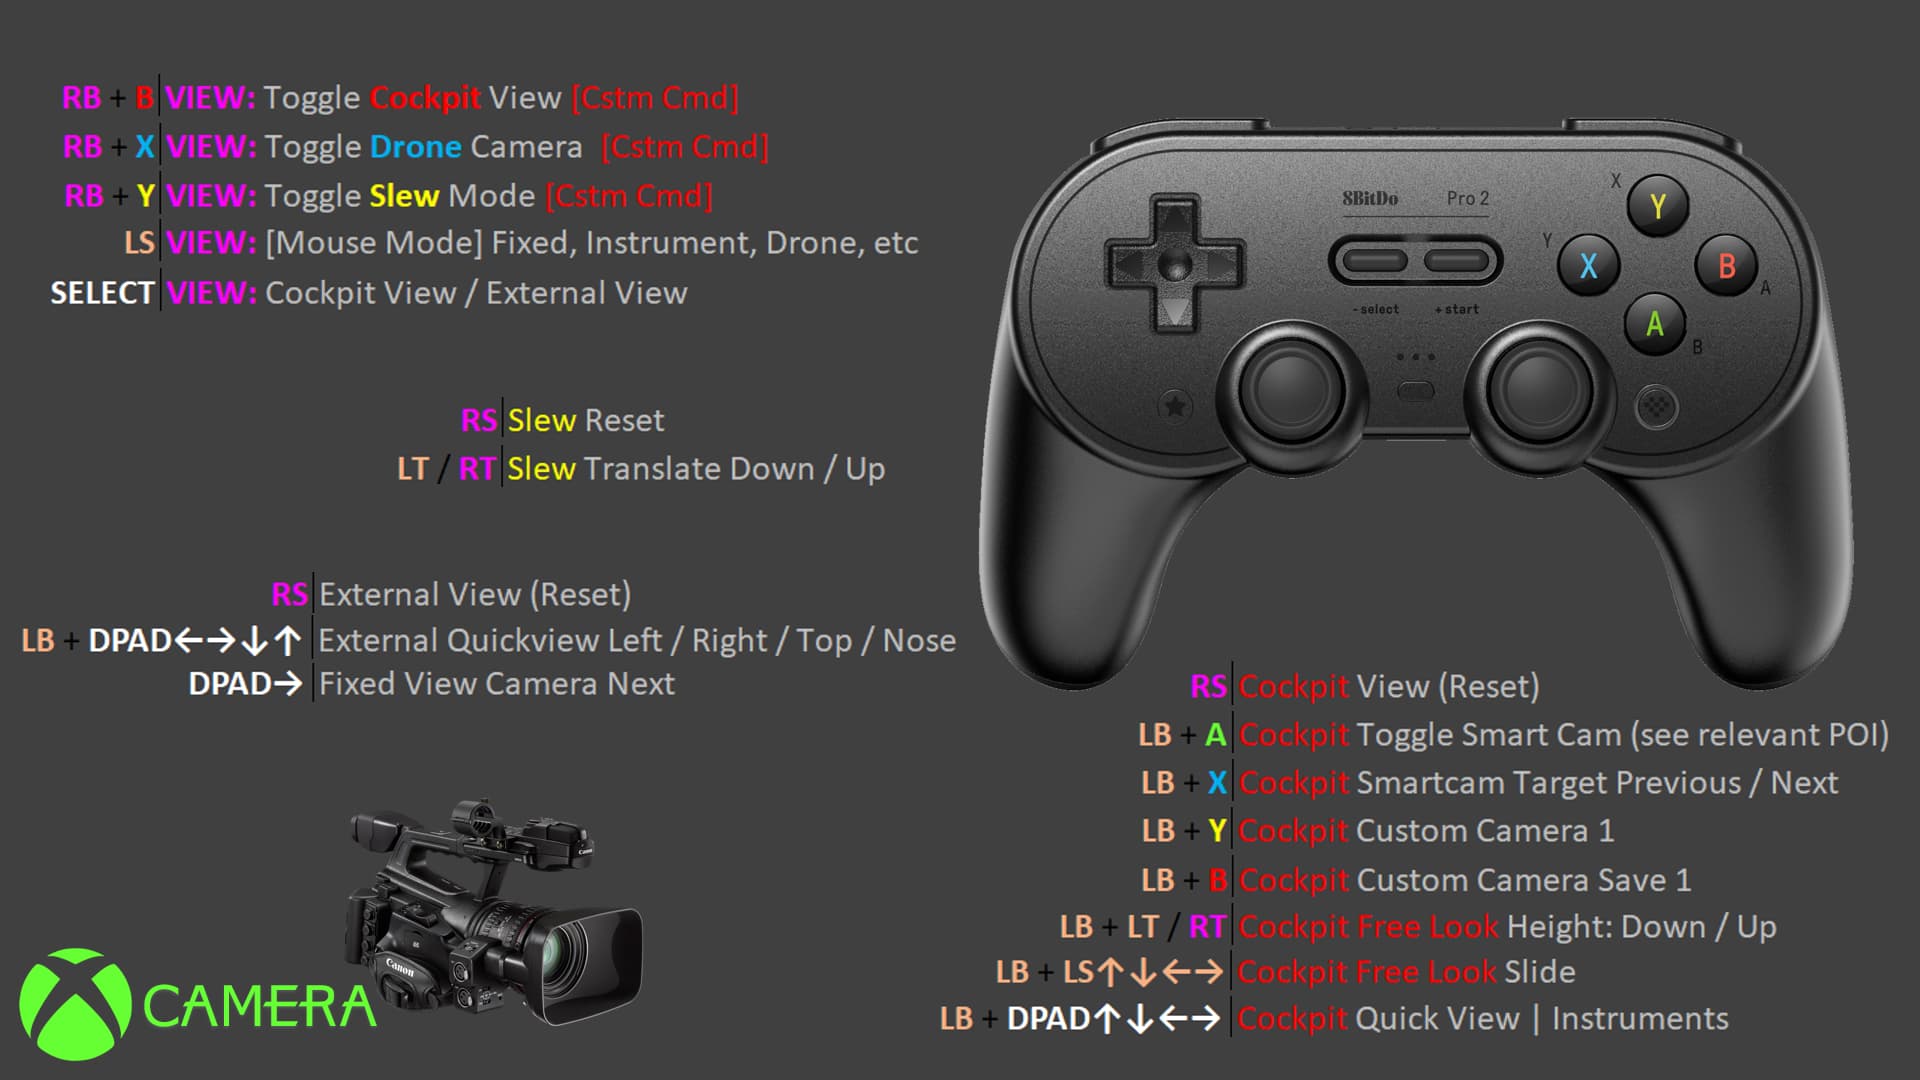 FS2020: Hints & Tips on Configuring your Xbox Controller for